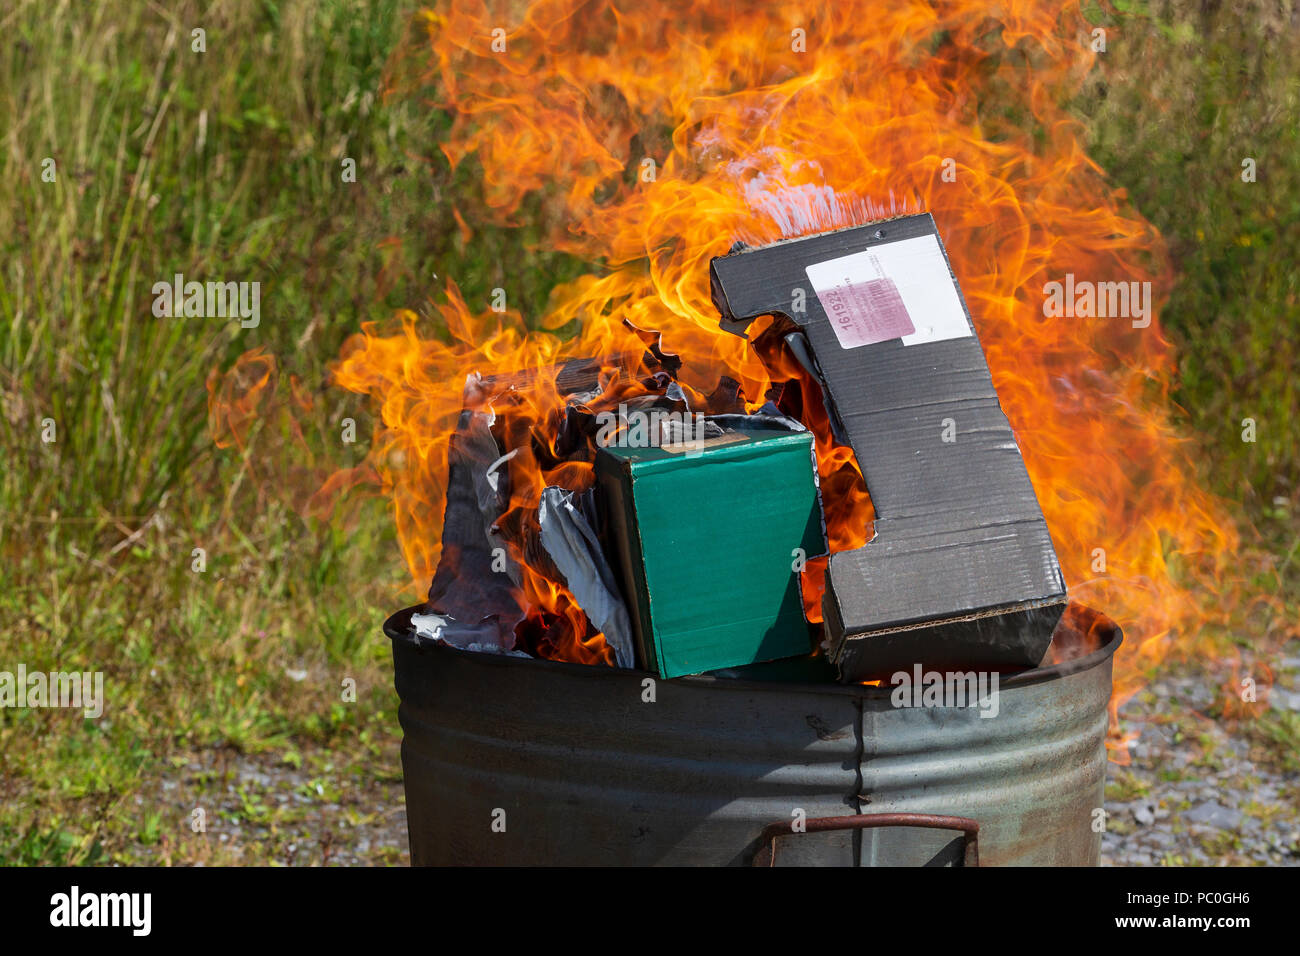 Burning waste paper and cardboard in small garden incinerator Stock Photo